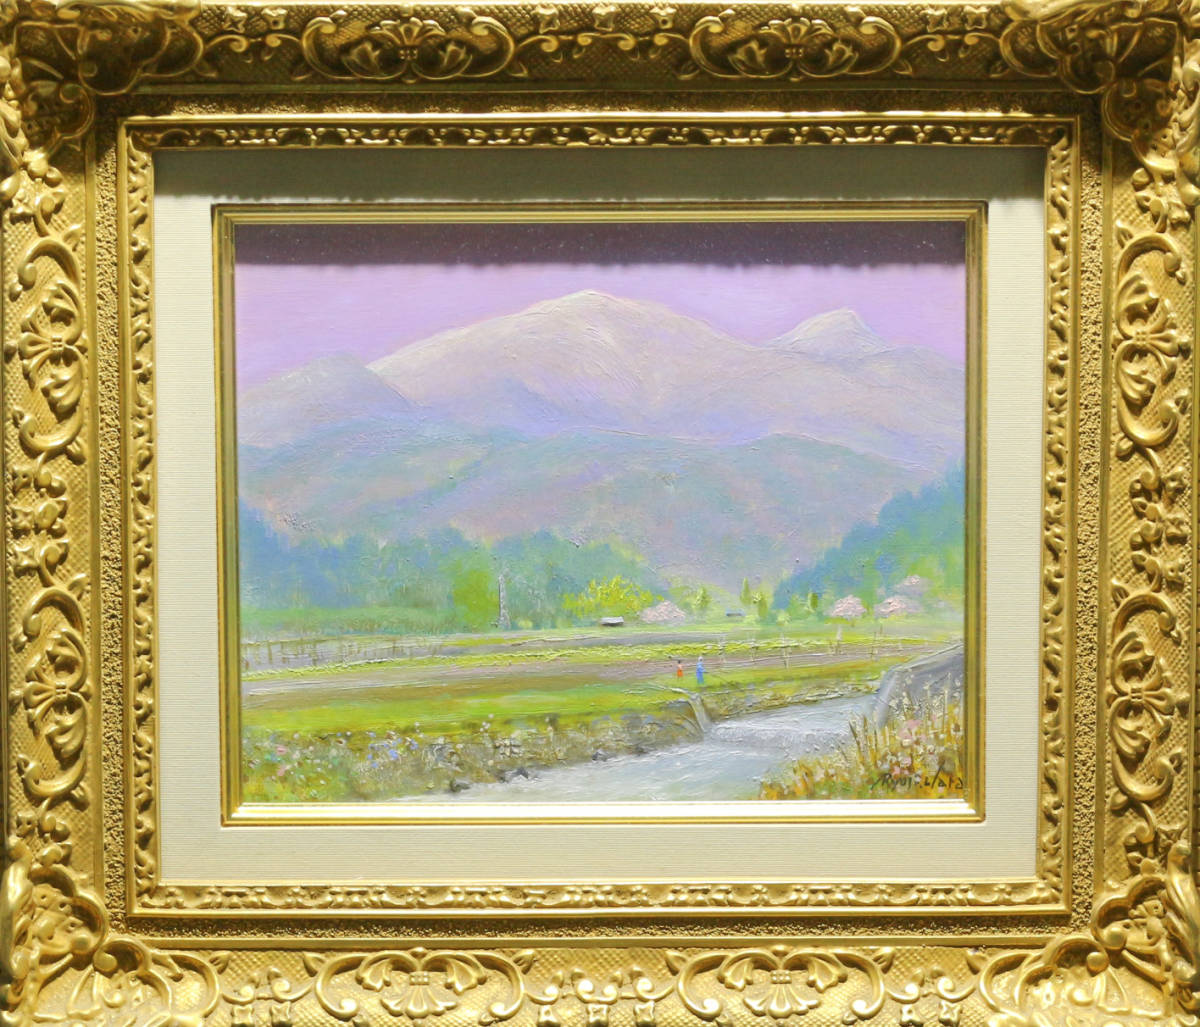 [.. height .. spring ]/. good next / oil painting ./ 3 number / autograph / oil painting / landscape painting / autograph autograph equipped / frame 